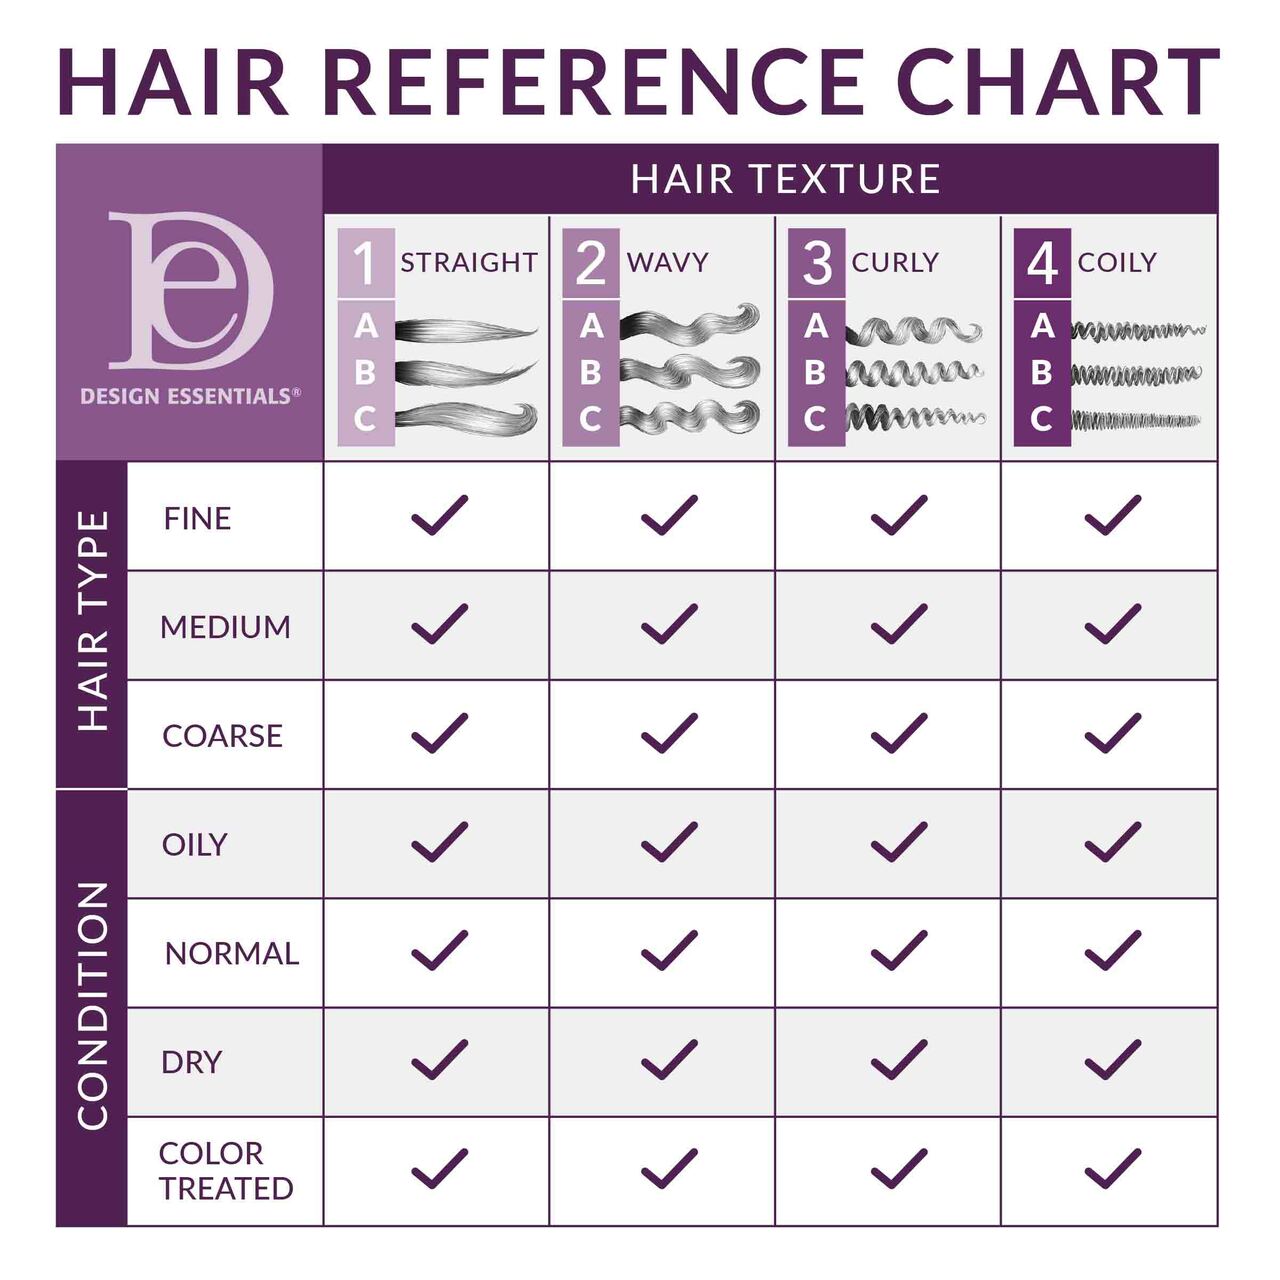 Pepperming_Aloe_Soothing_Scalp_Tonic_-_Hair_Reference_Chart__02591.1631194943